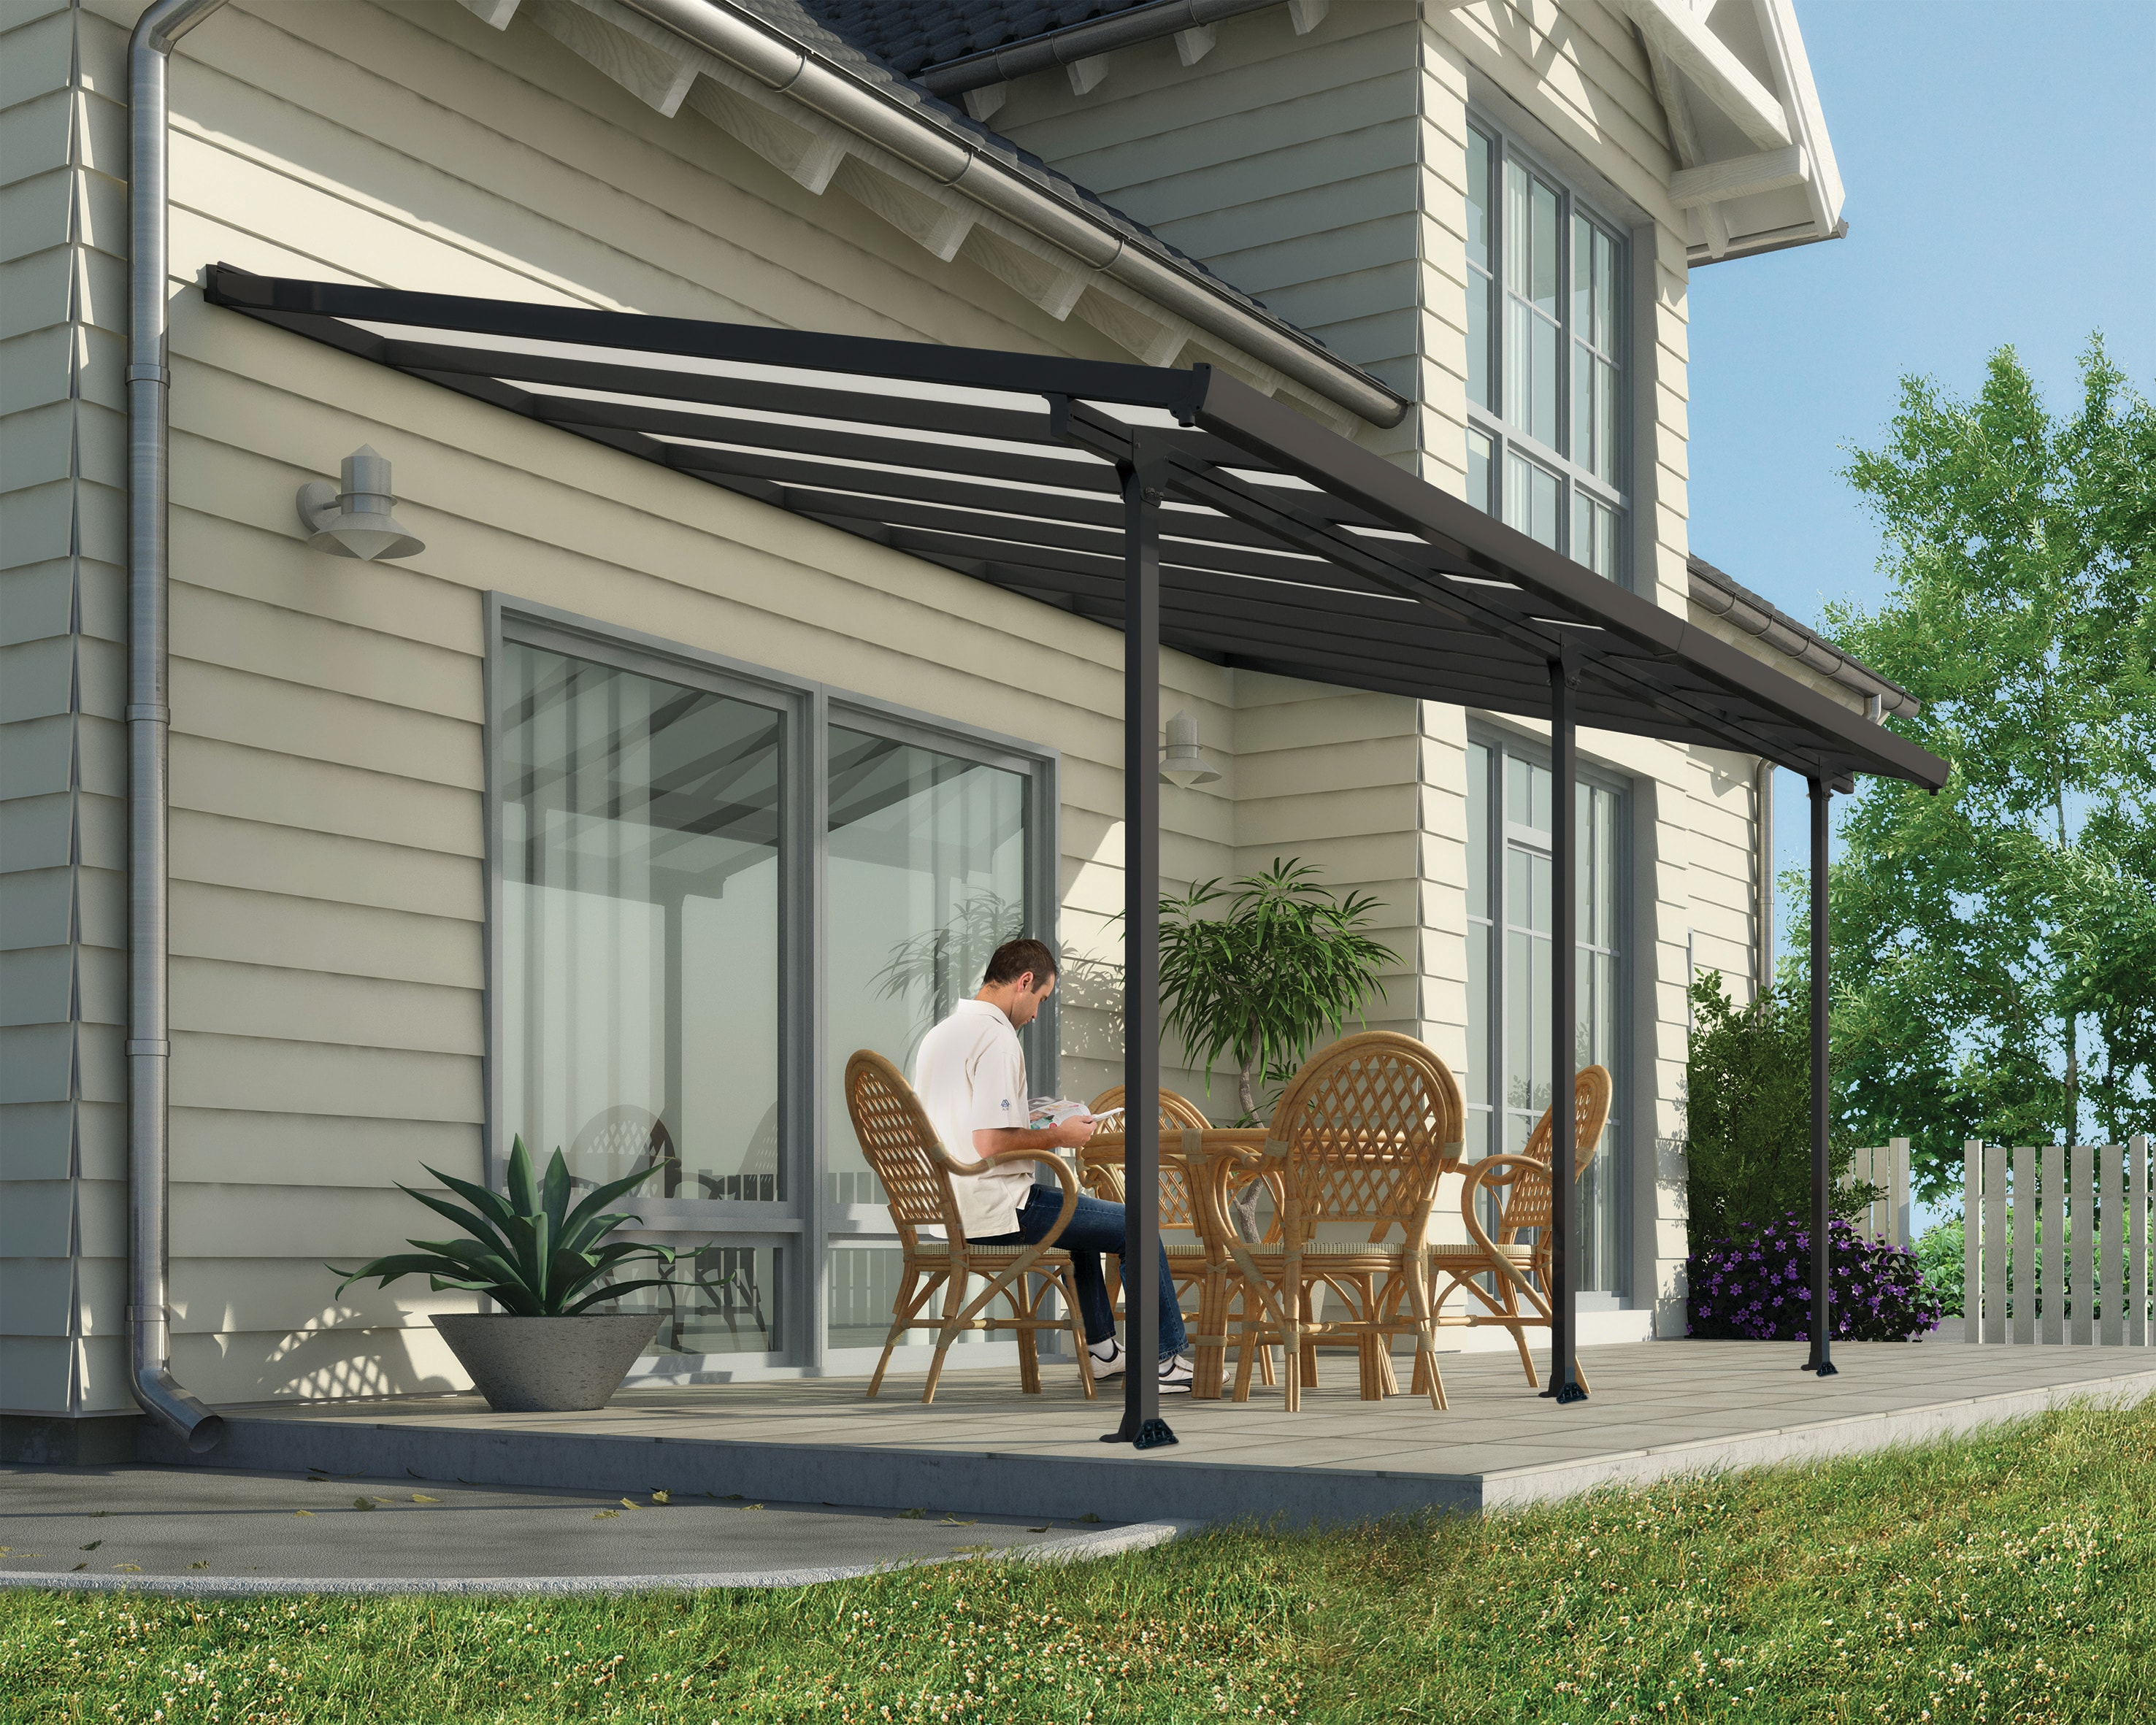 Olympia 10 ft. x 20 ft. Patio Cover kit